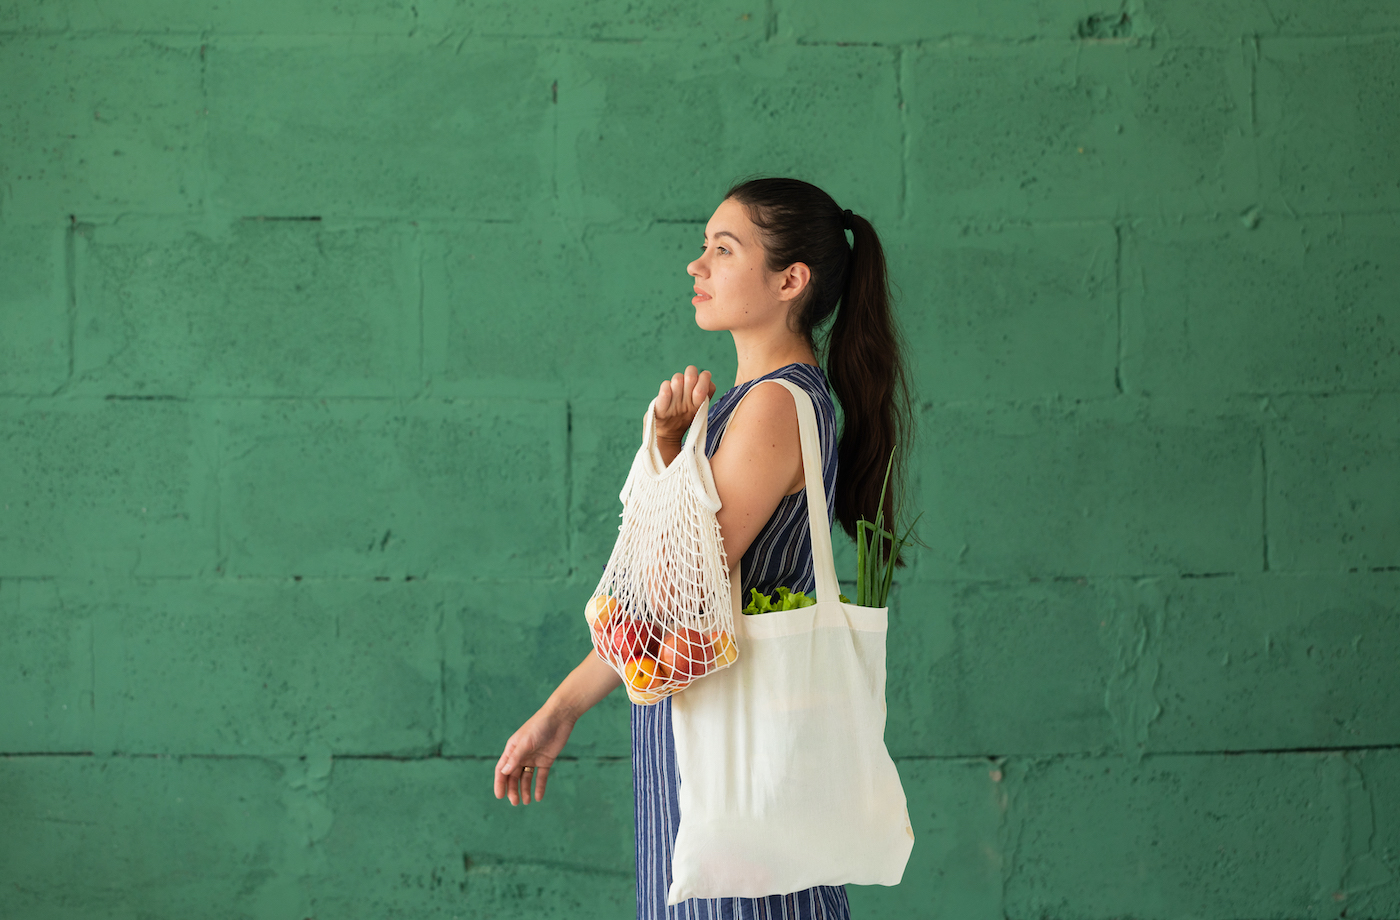 How to clean canvas tote bags you use to carry groceries | Well+Good